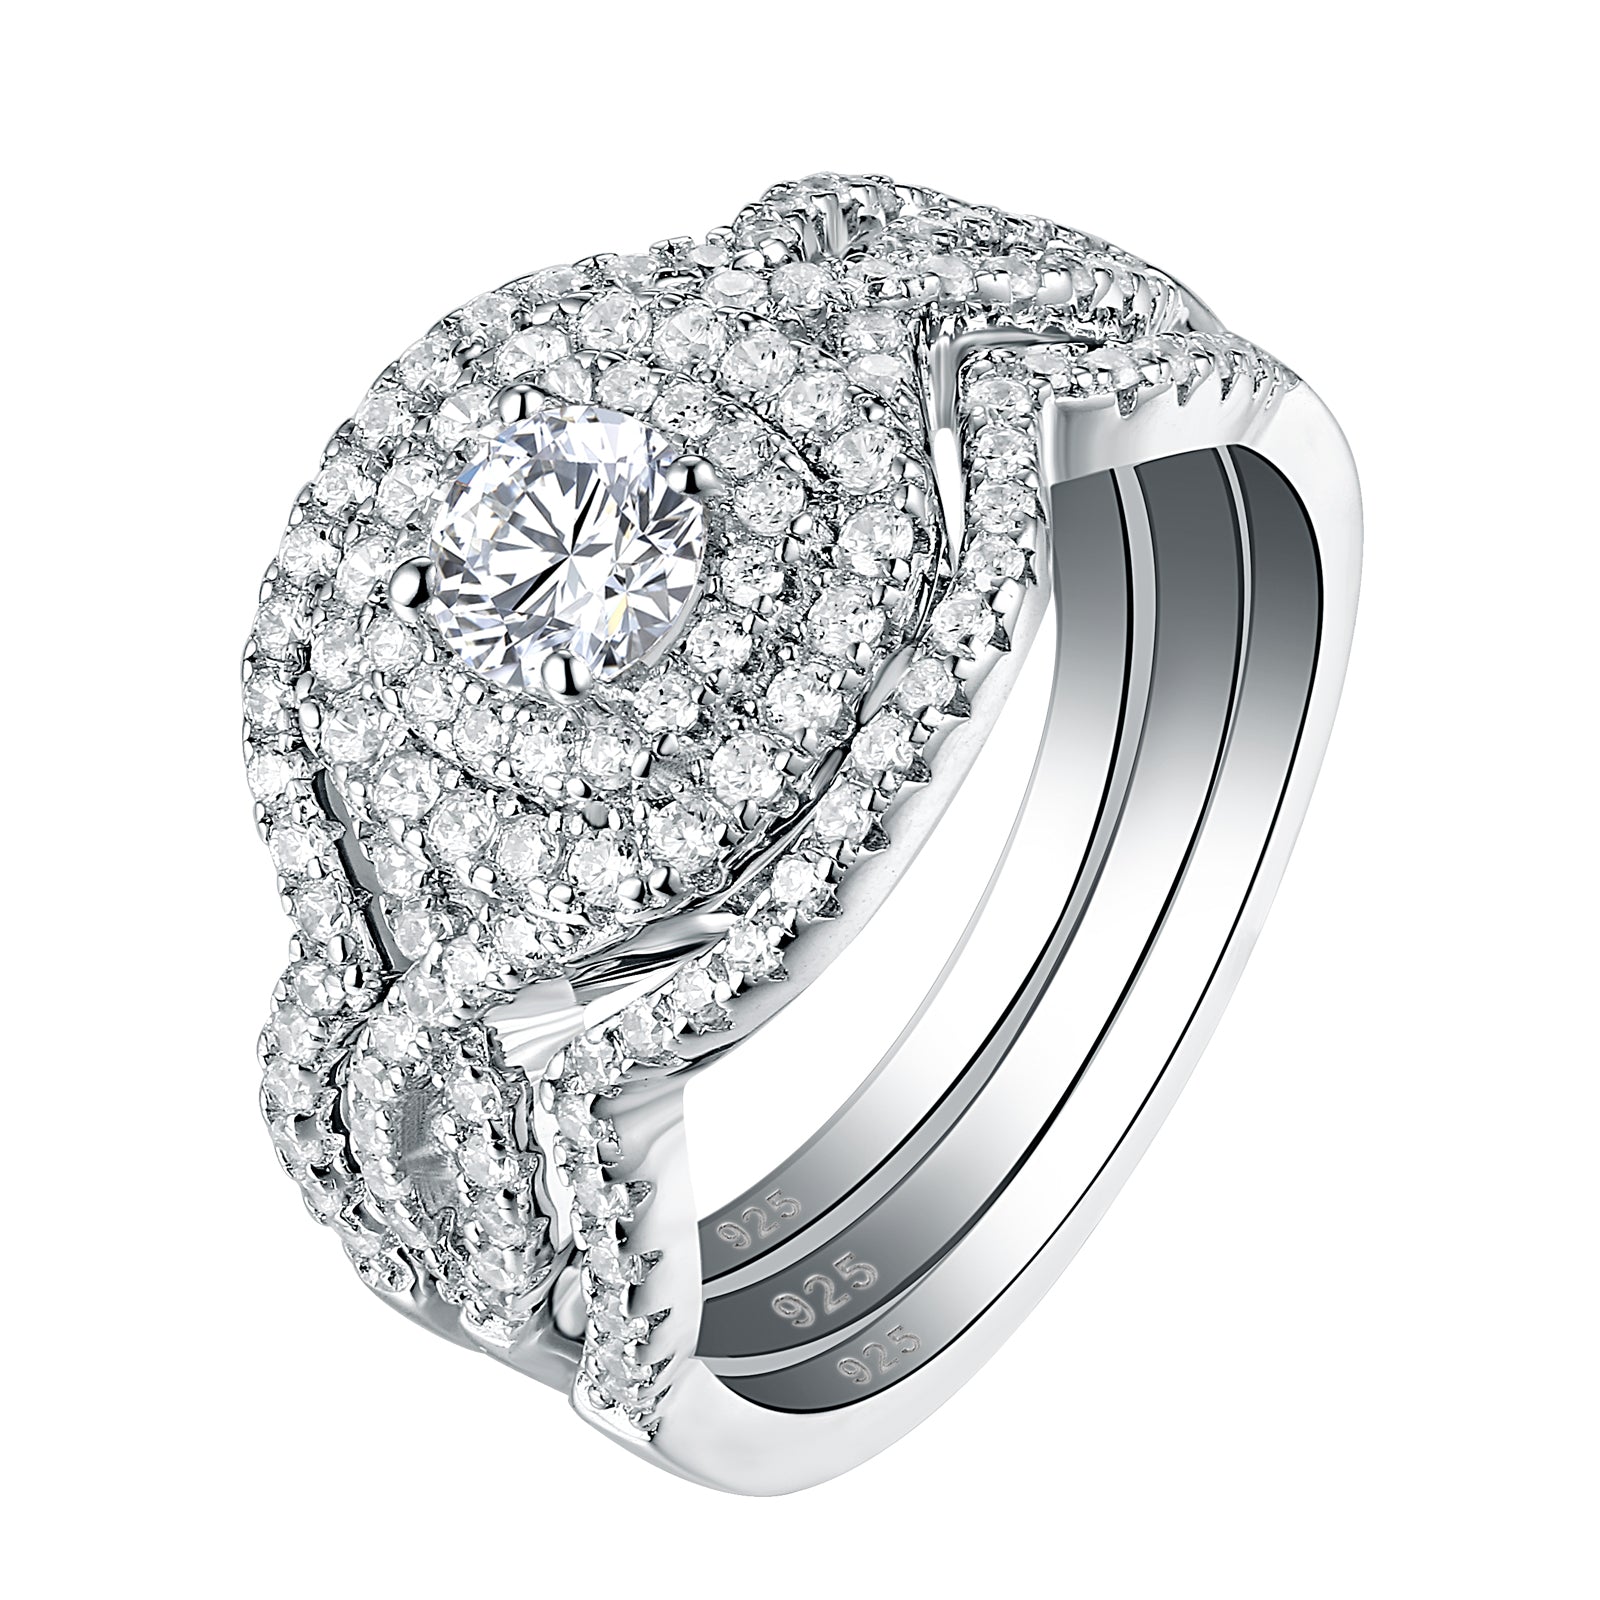 Classic Cubic Zirconia 925 Sterling Silver Wedding Ring Set